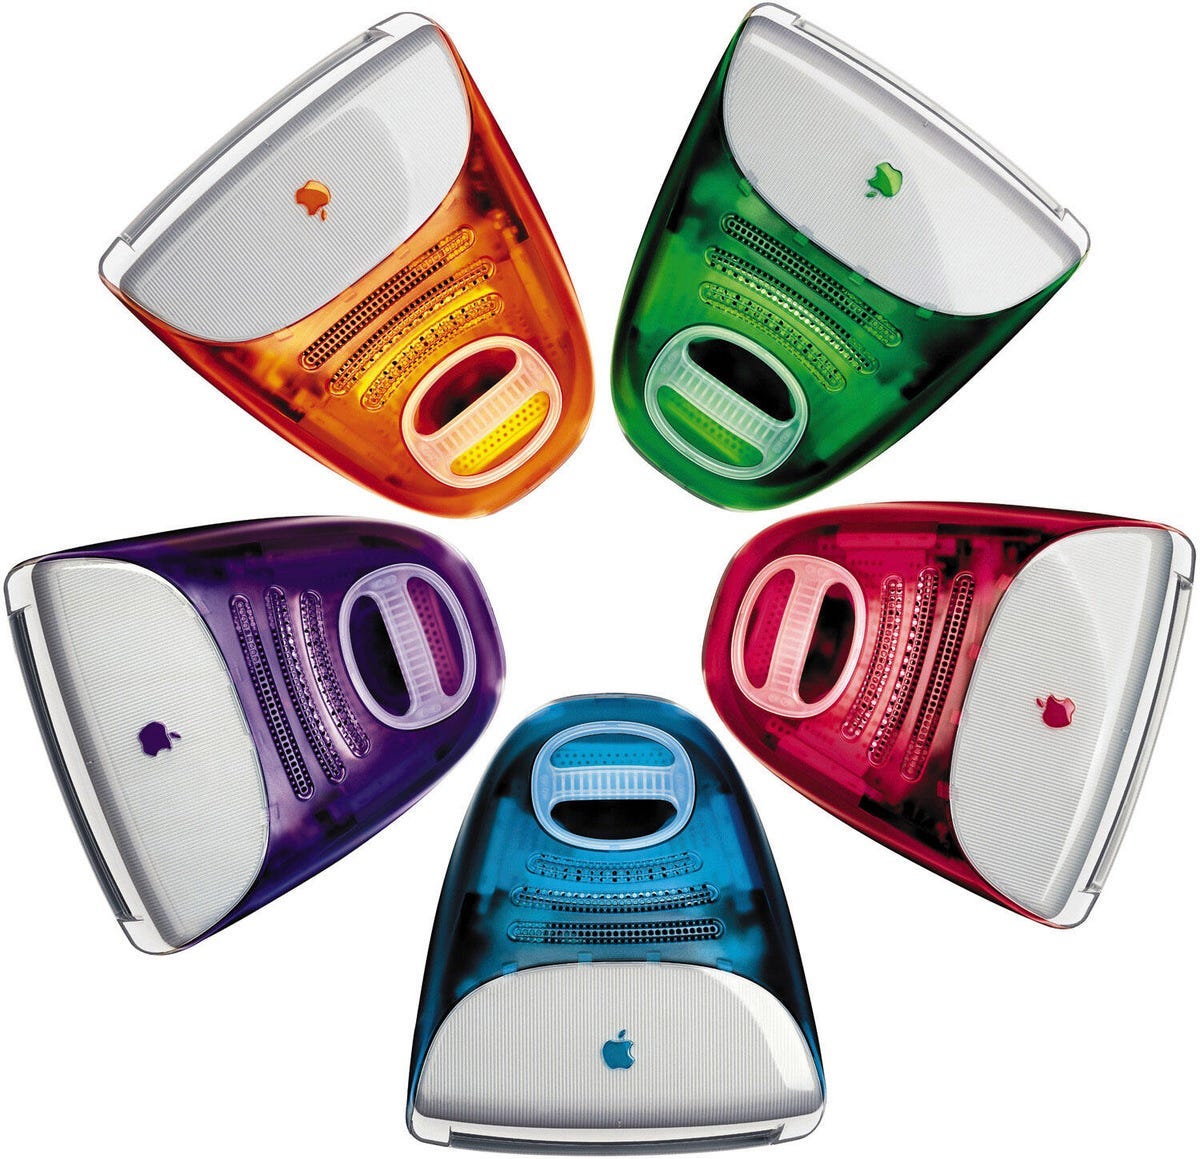 iMac throwback: Apple's candy-colored history, from 1999 to 2021 - CNET